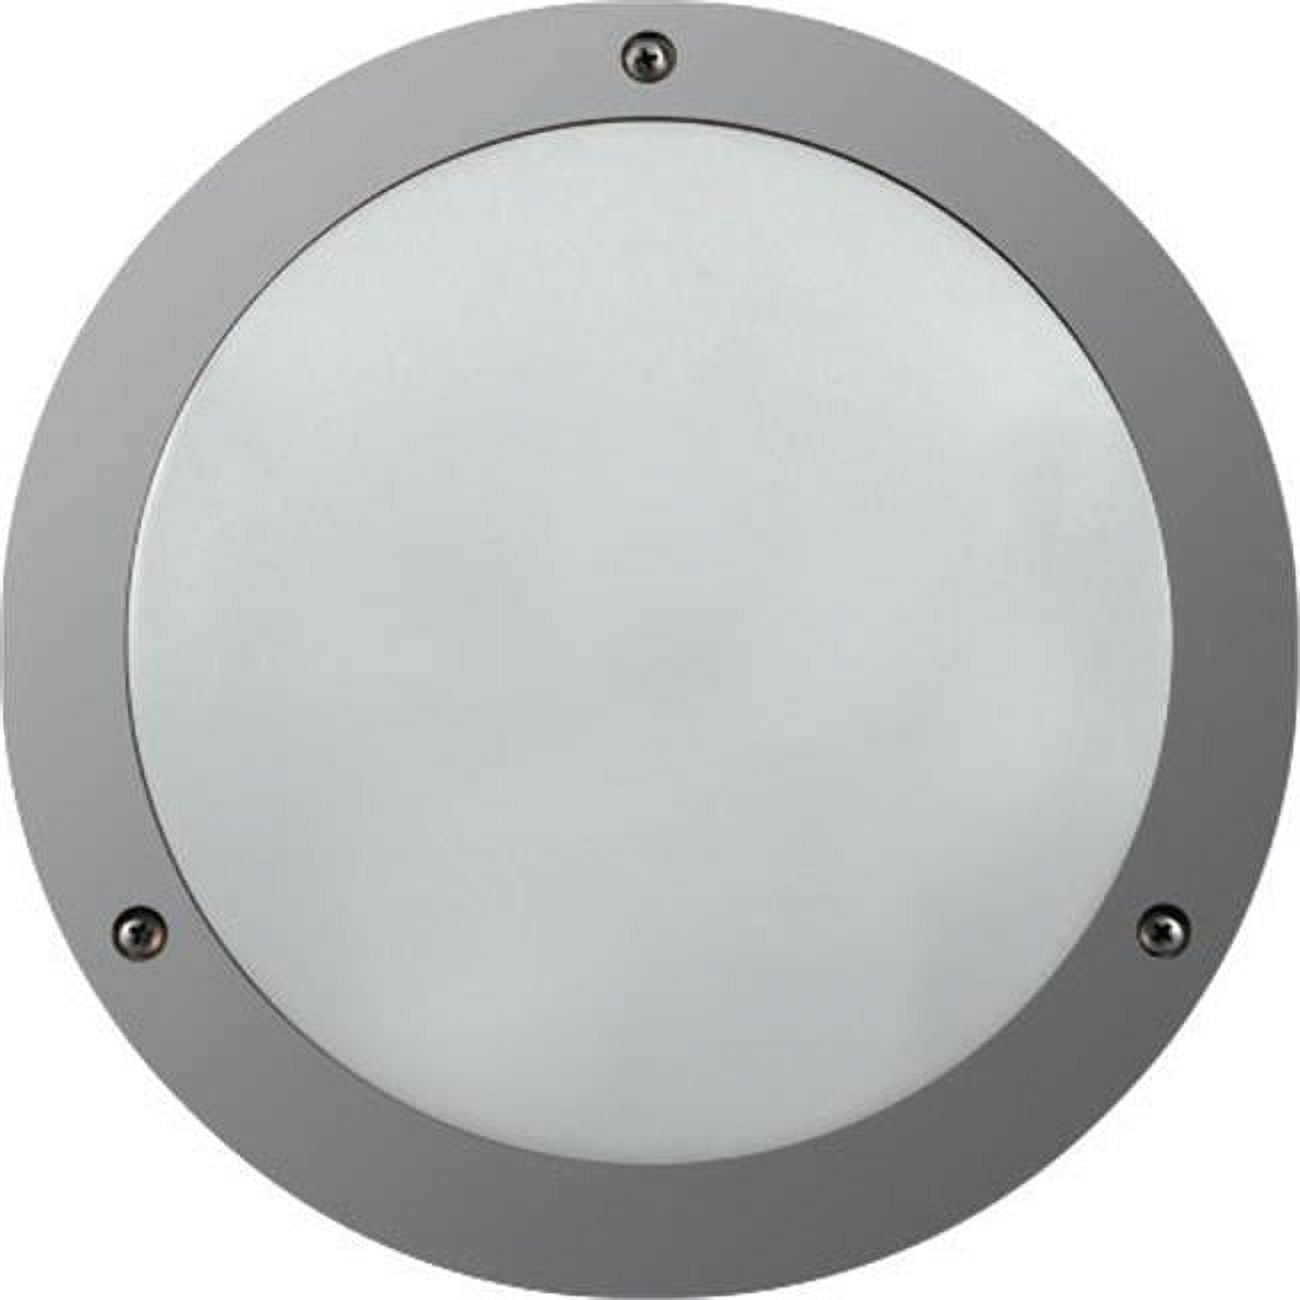 Picture of Dabmar Lighting W3900-LED12-W Cast Aluminum Wall Fixture LED - 12W 120V, White